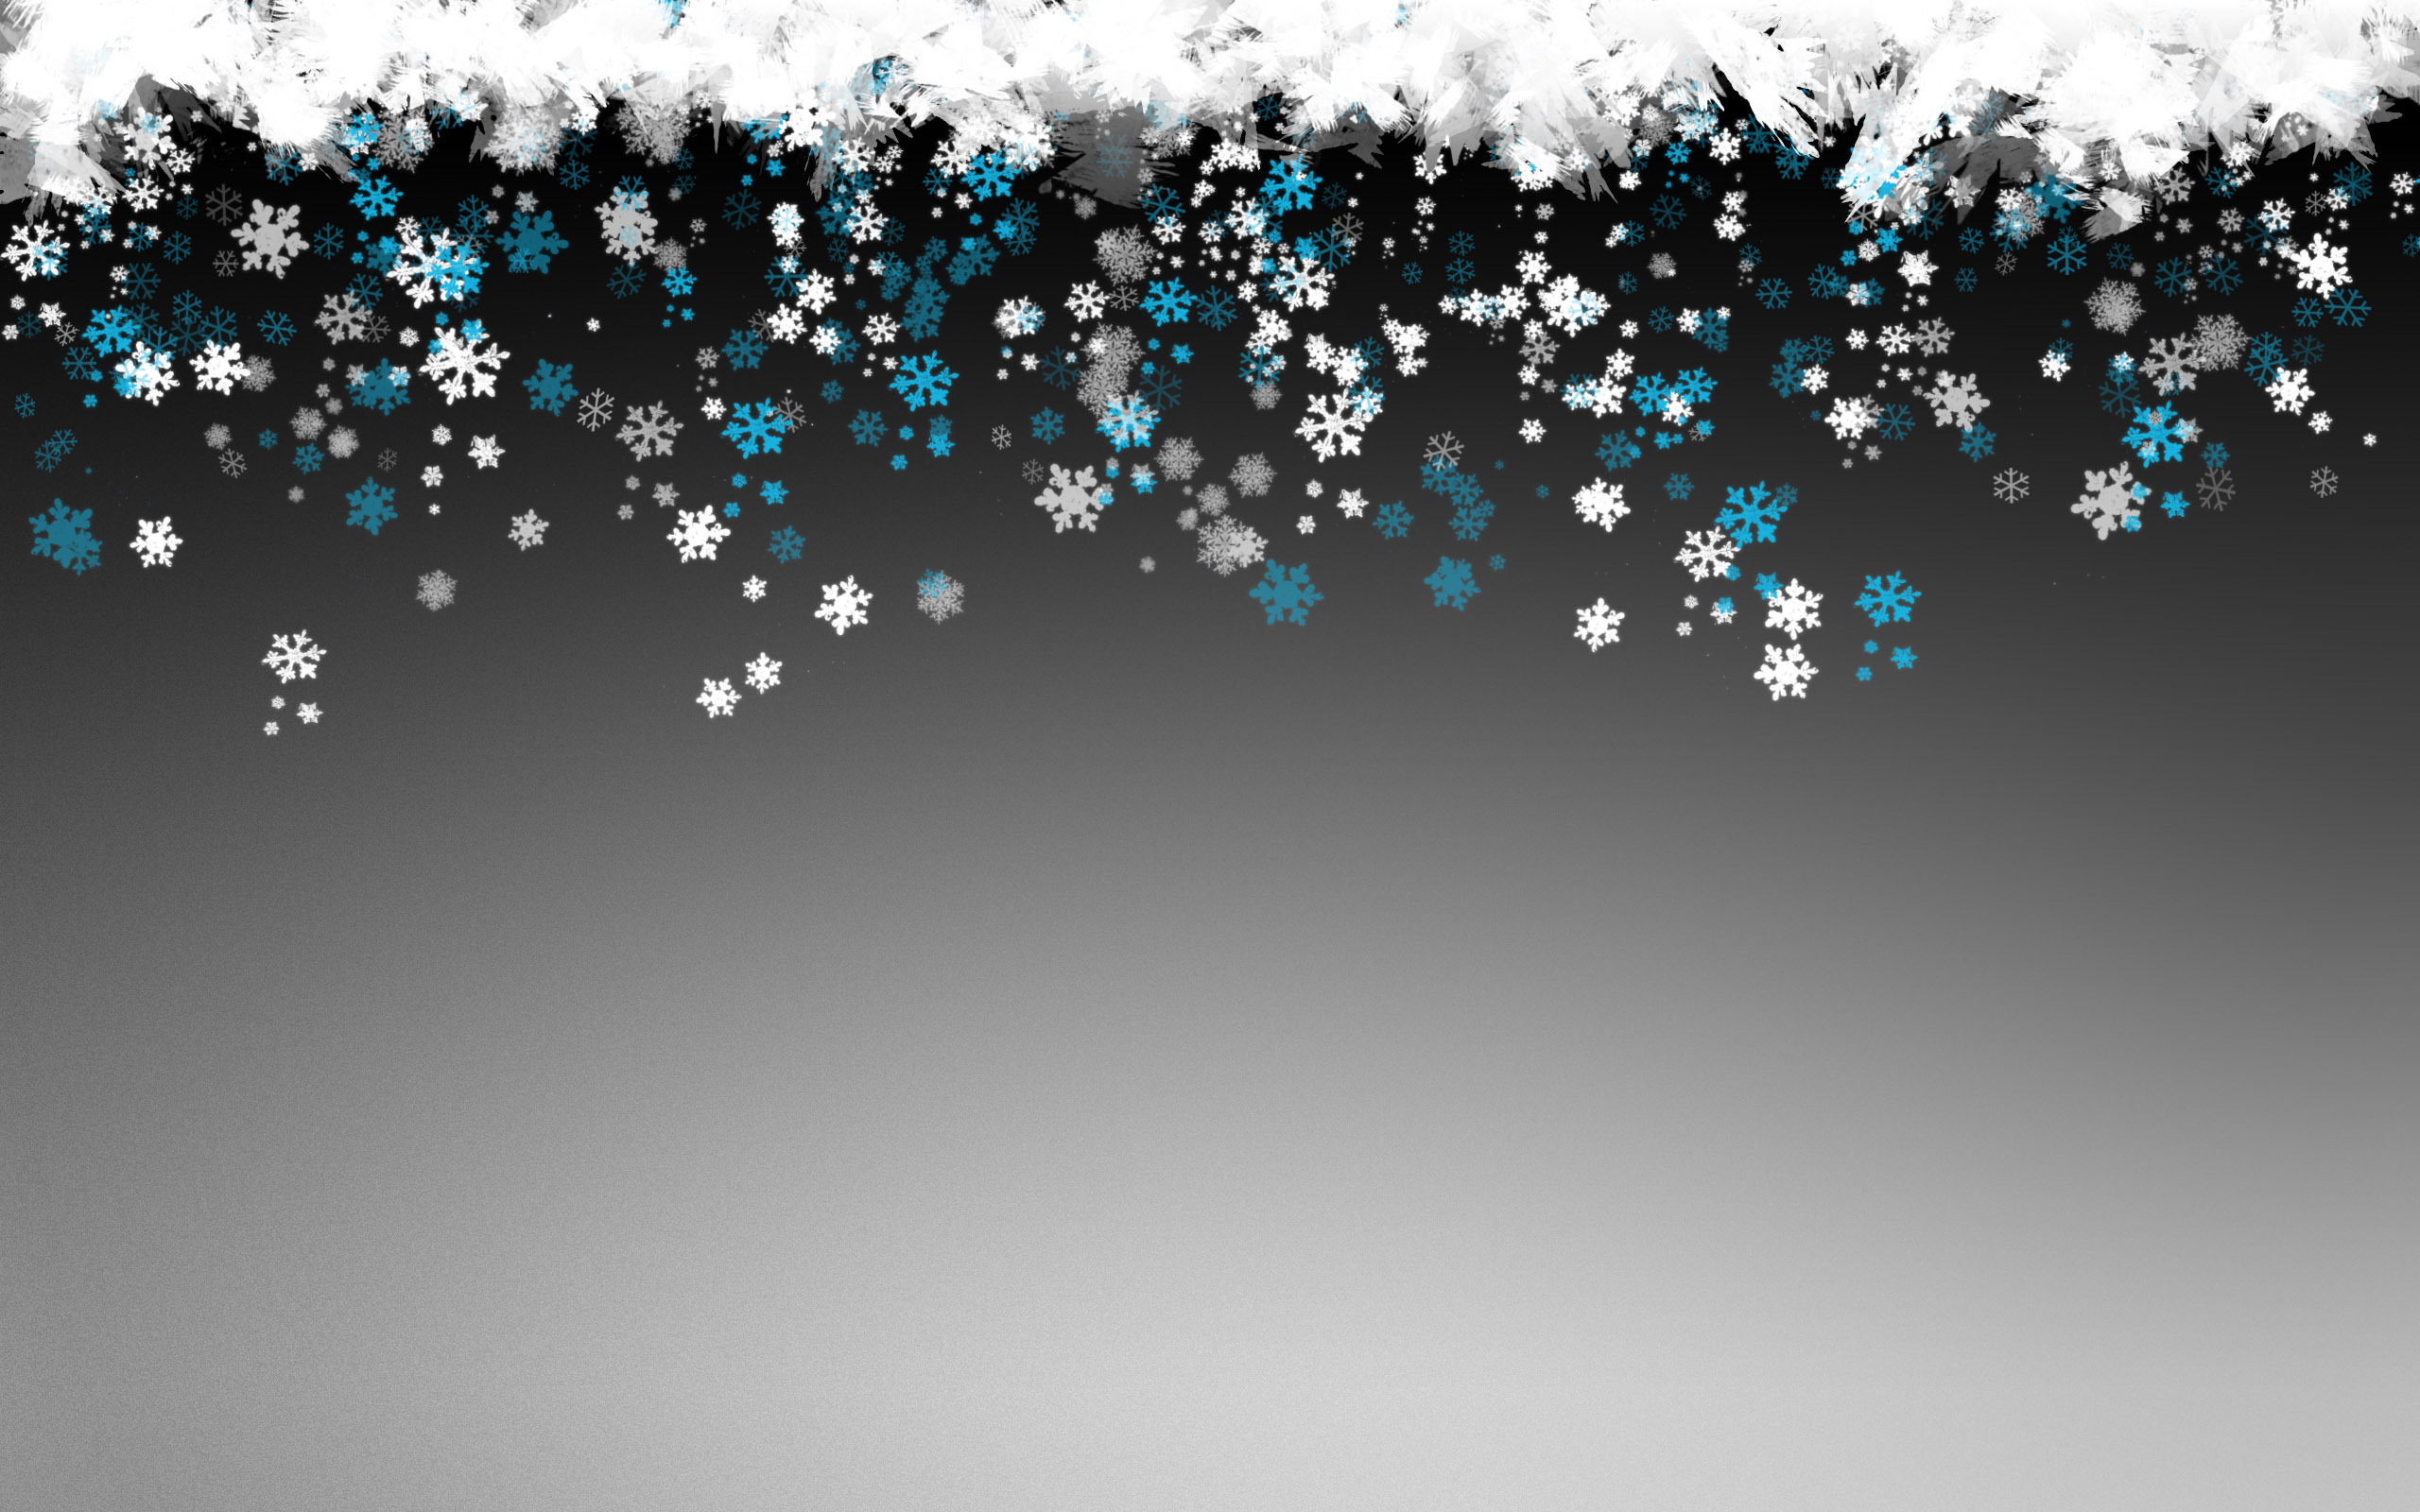 1080p Snowflakes Hd Images